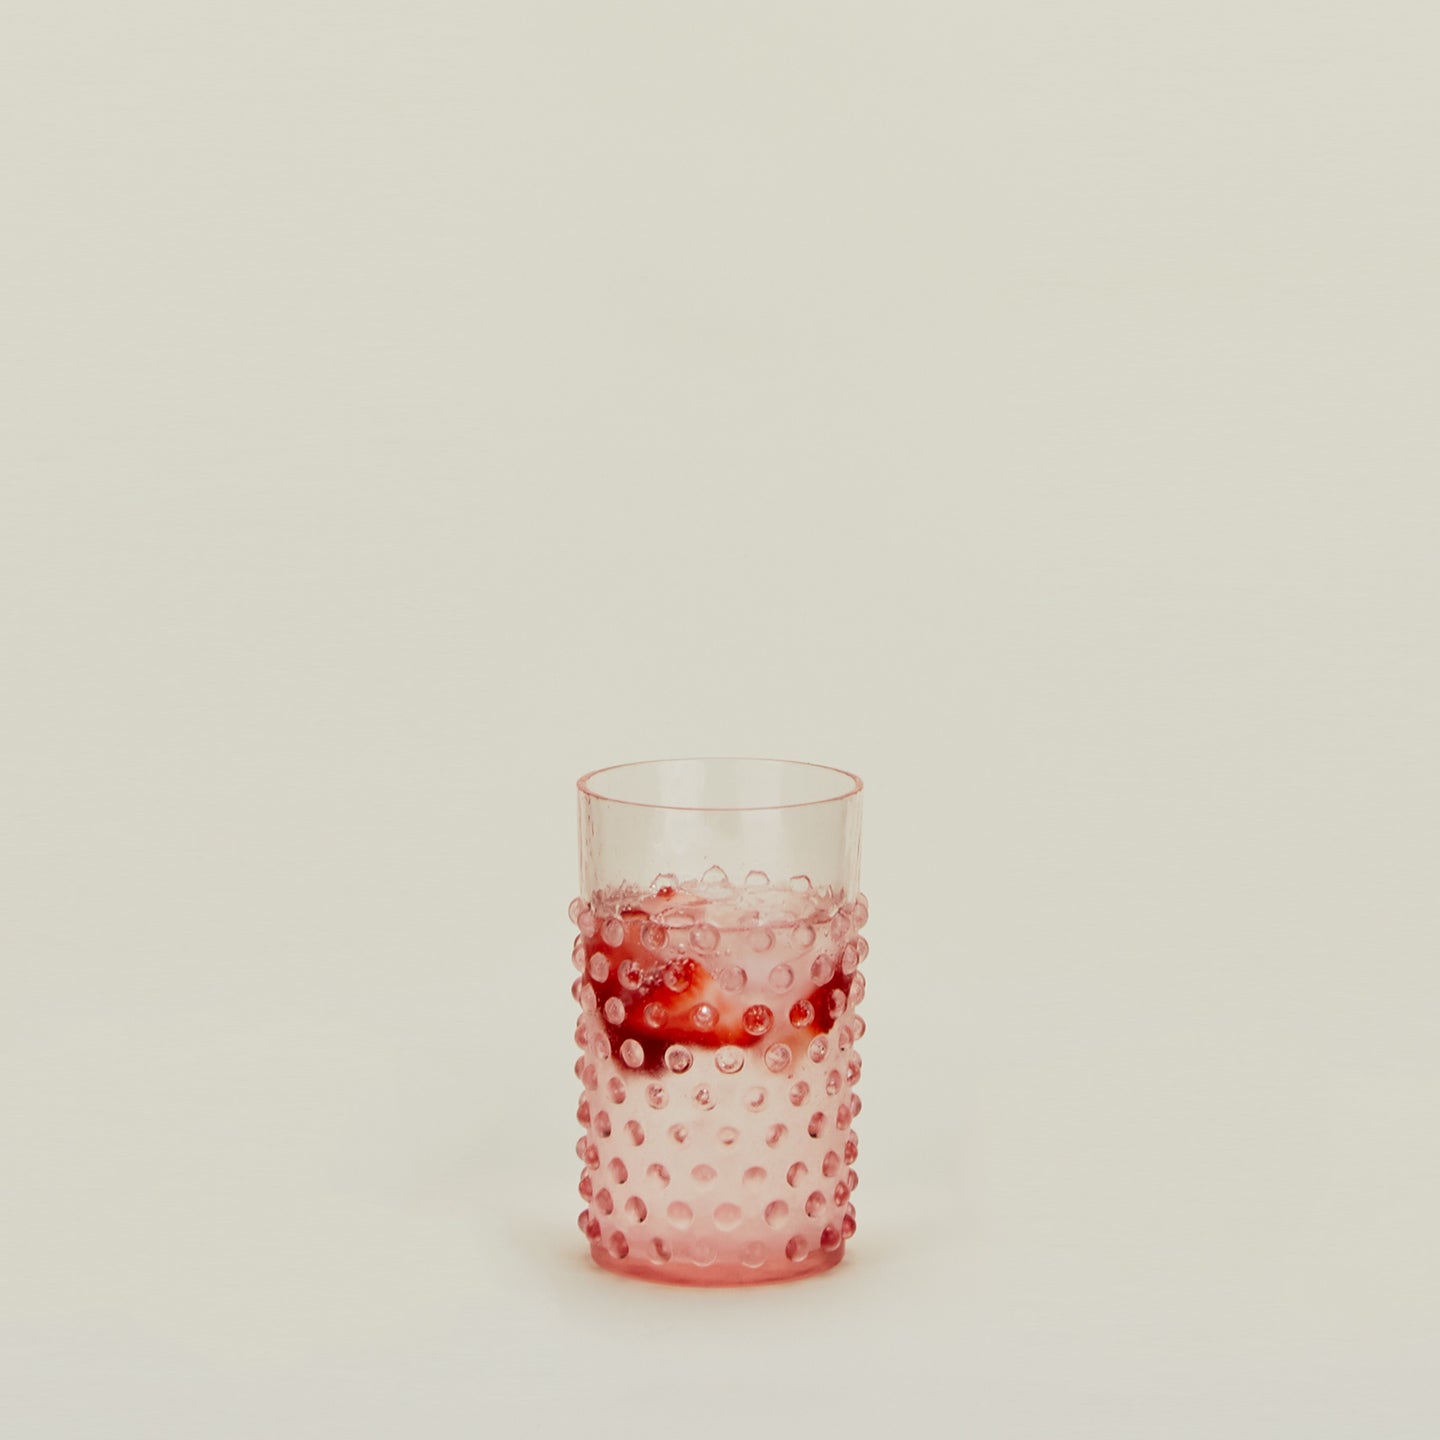 Hobnail Tumbler in Blush filled with water and fruit.